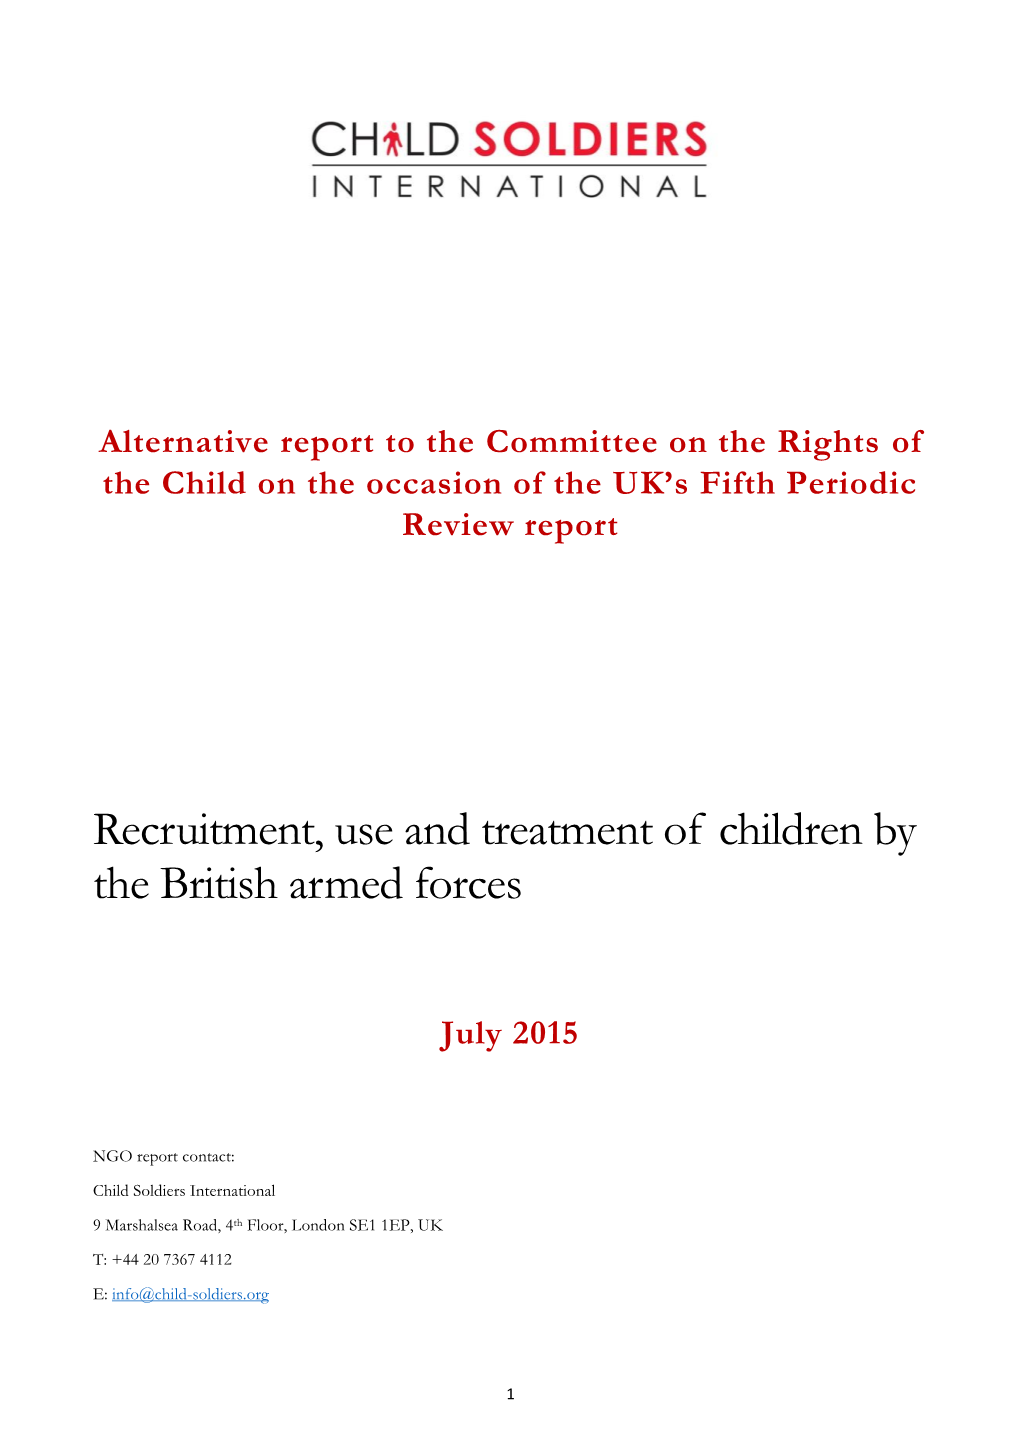 Recruitment, Use and Treatment of Children by the British Armed Forces